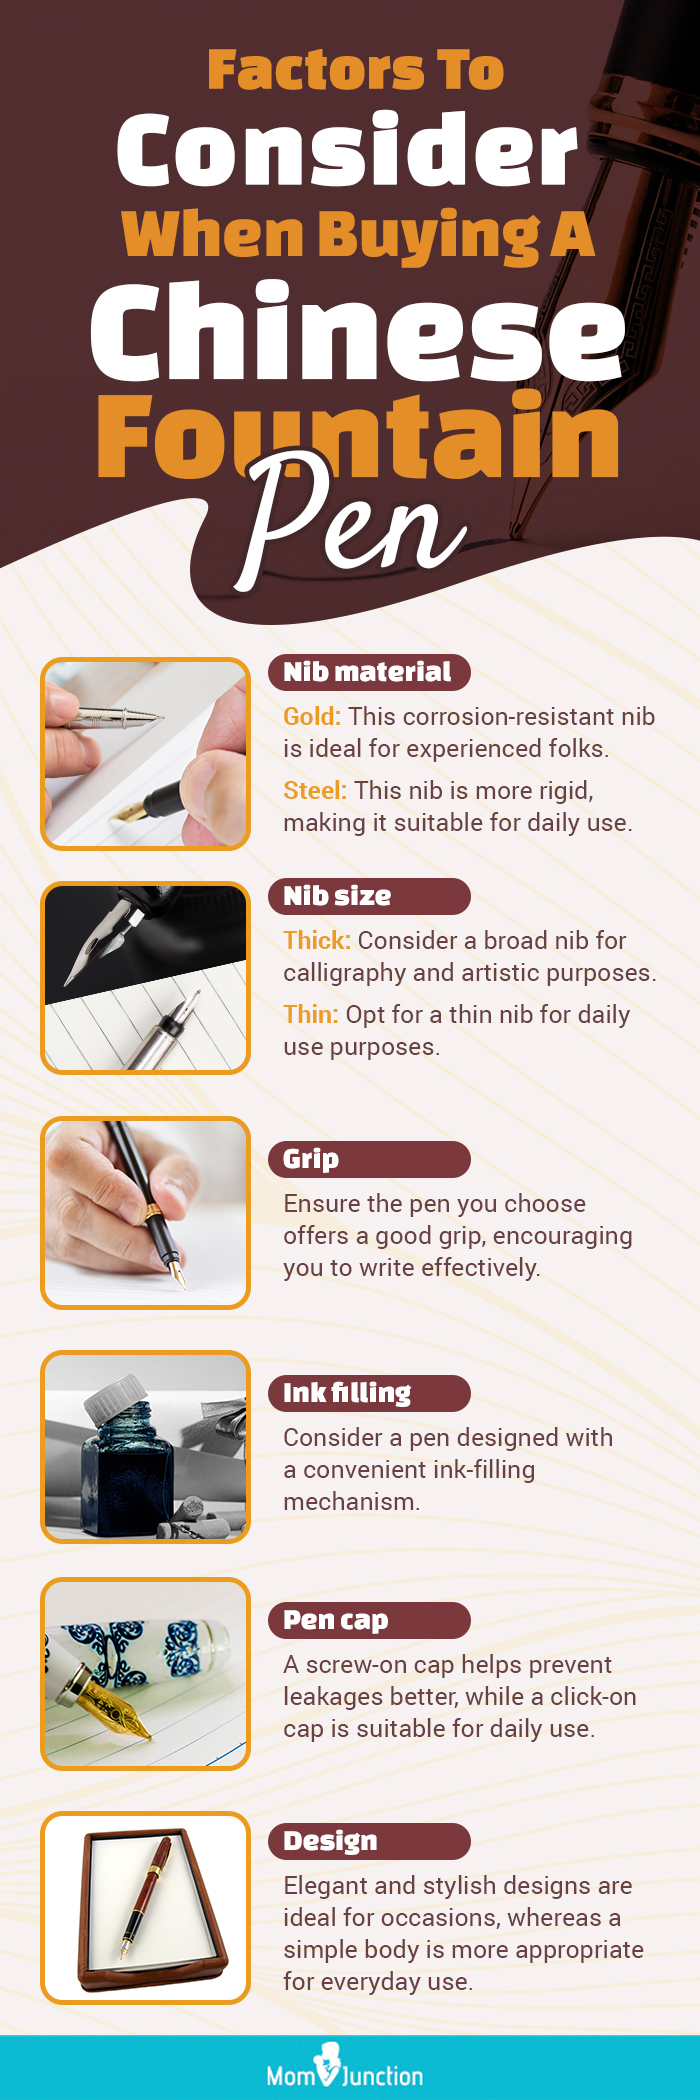 Factors To Consider When Buying A Chinese Fountain Pen (infographic)